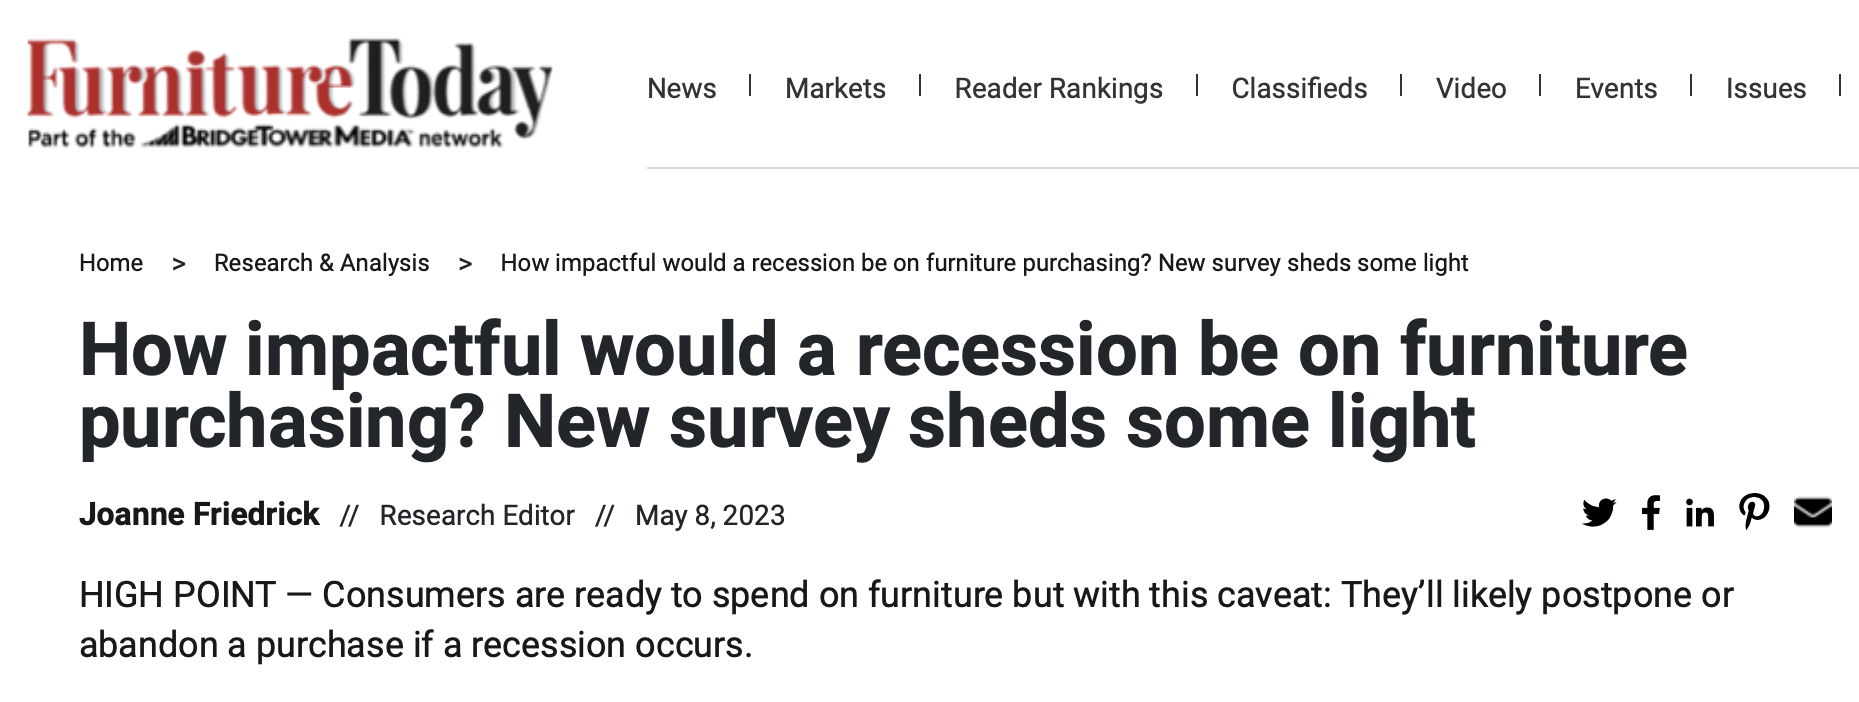 How impactful would a recession be on furniture purchasing? New survey sheds some light